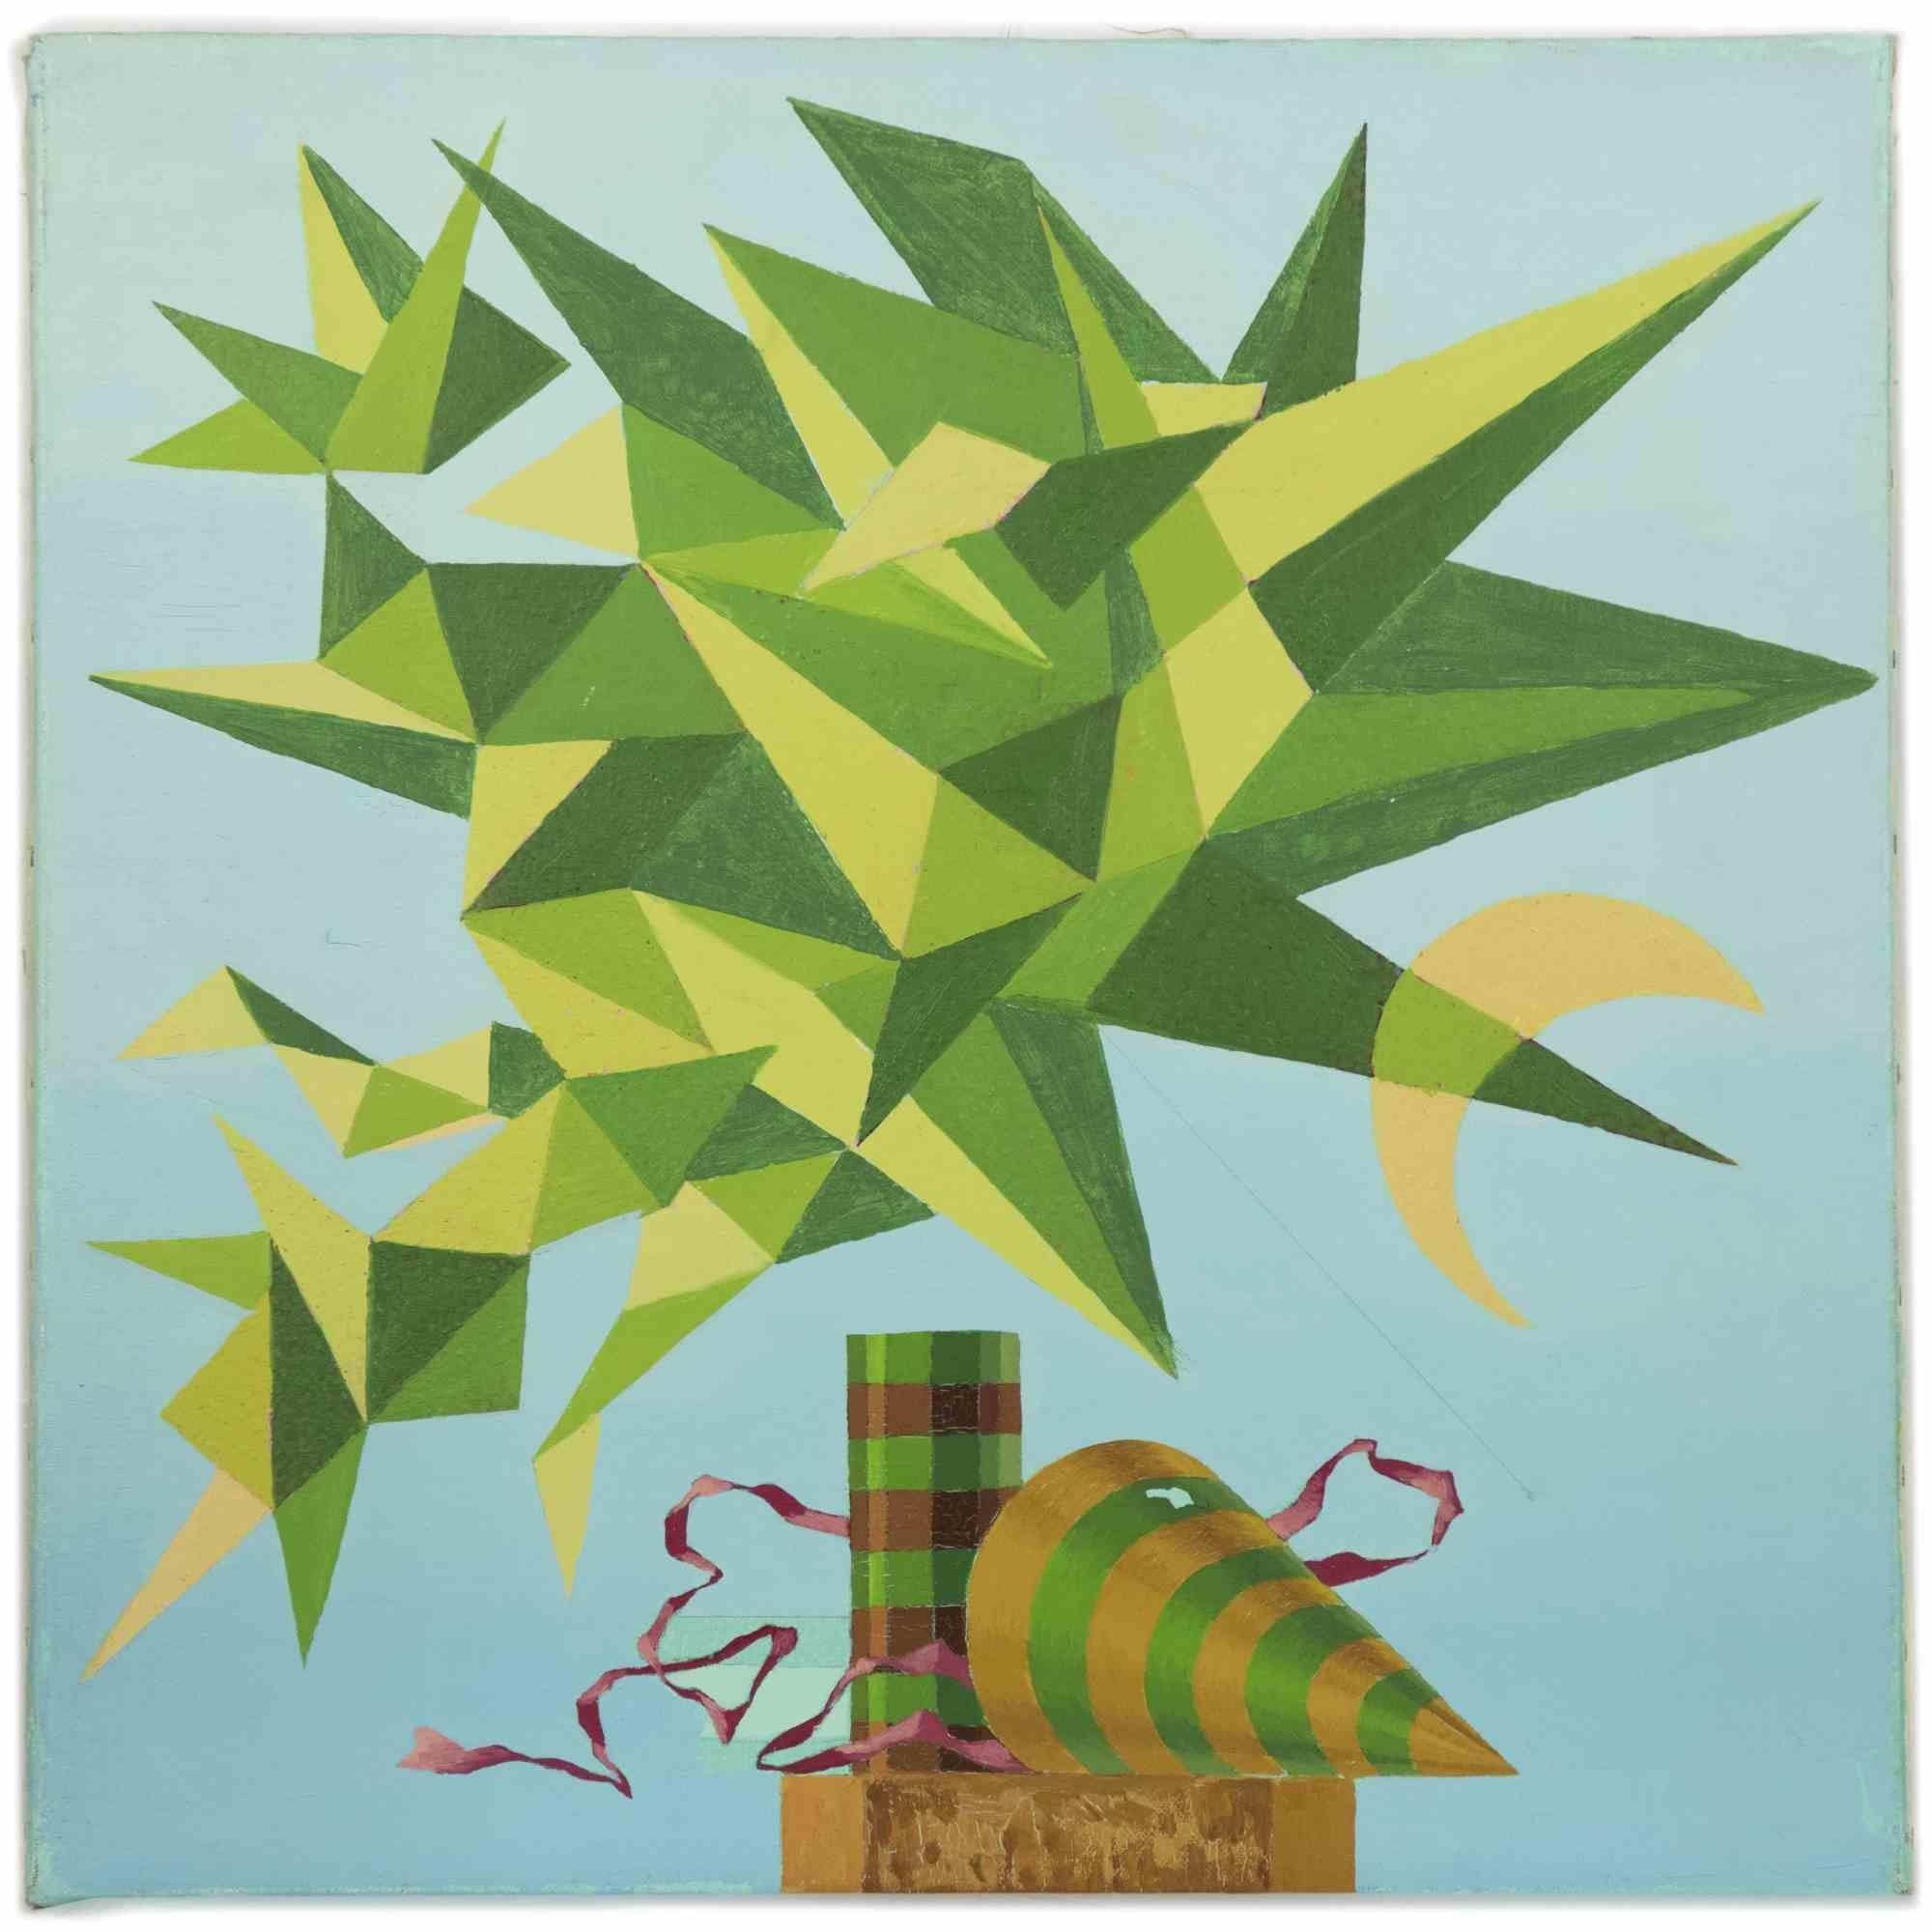 Green Composition is a contemporary artwork realized by Leo Guida in 1970s

Mixed colored oil painting on canvas.

Leo Guida  (1992 - 2017). S ensitive to current issues, artistic movements and historical techniques, Leo Guida has been able to weave